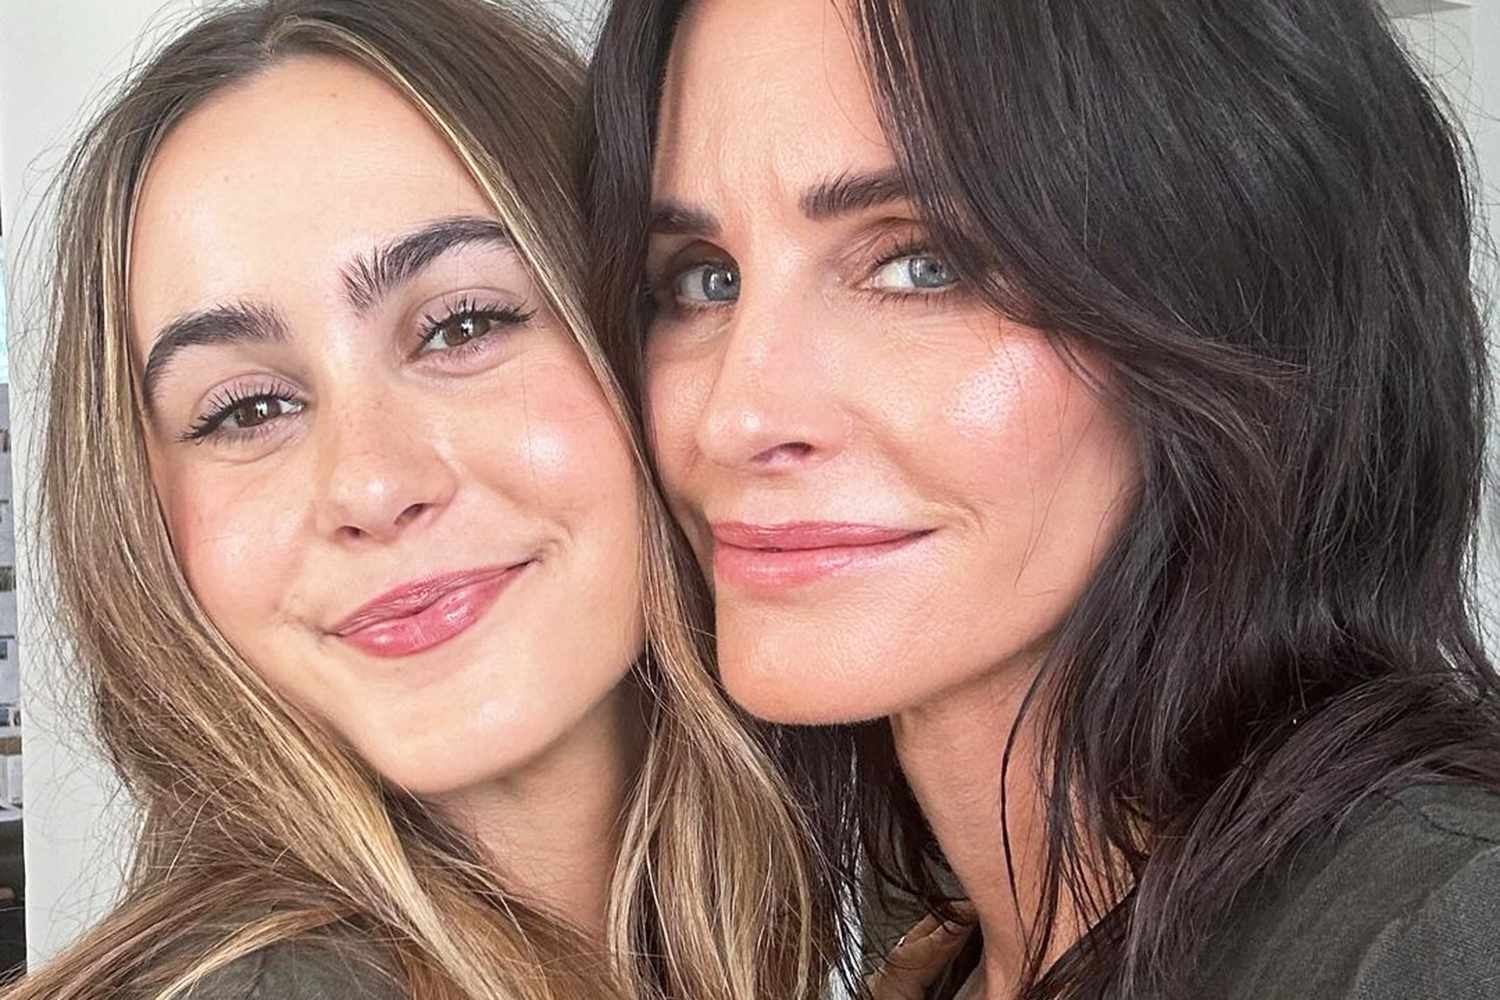 Courteney Cox Is All Smiles as She Spends Mother's Day with Daughter Coco and Snaps Sweet Selfie